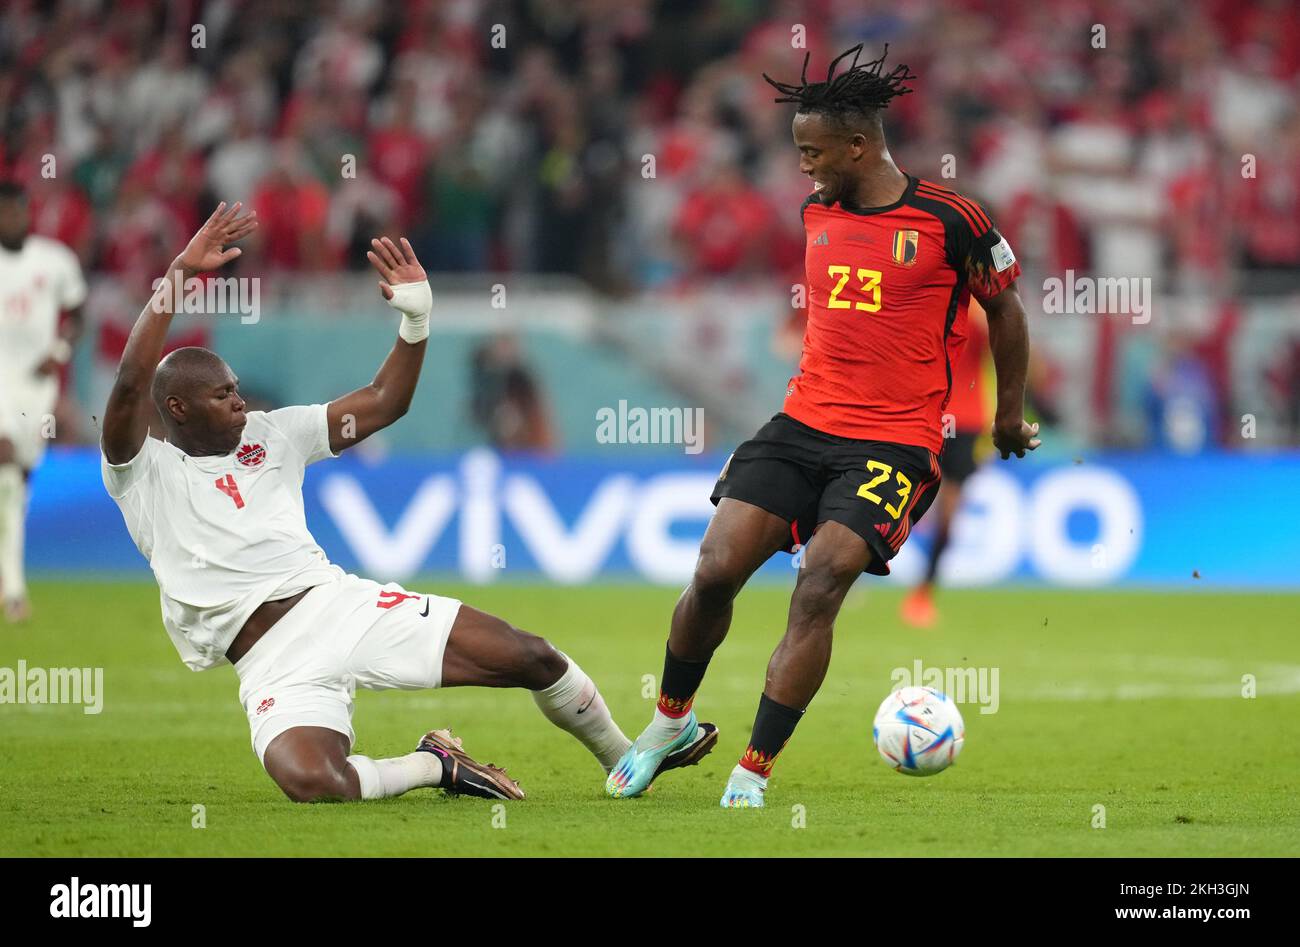 Canada's Kamal Miller (left) and Belgium's Michy Batshuayi battle for the ball during the FIFA World Cup Group F match at the Ahmad bin Ali Stadium, Al Rayyan. Picture date: Wednesday November 23, 2022. Stock Photo